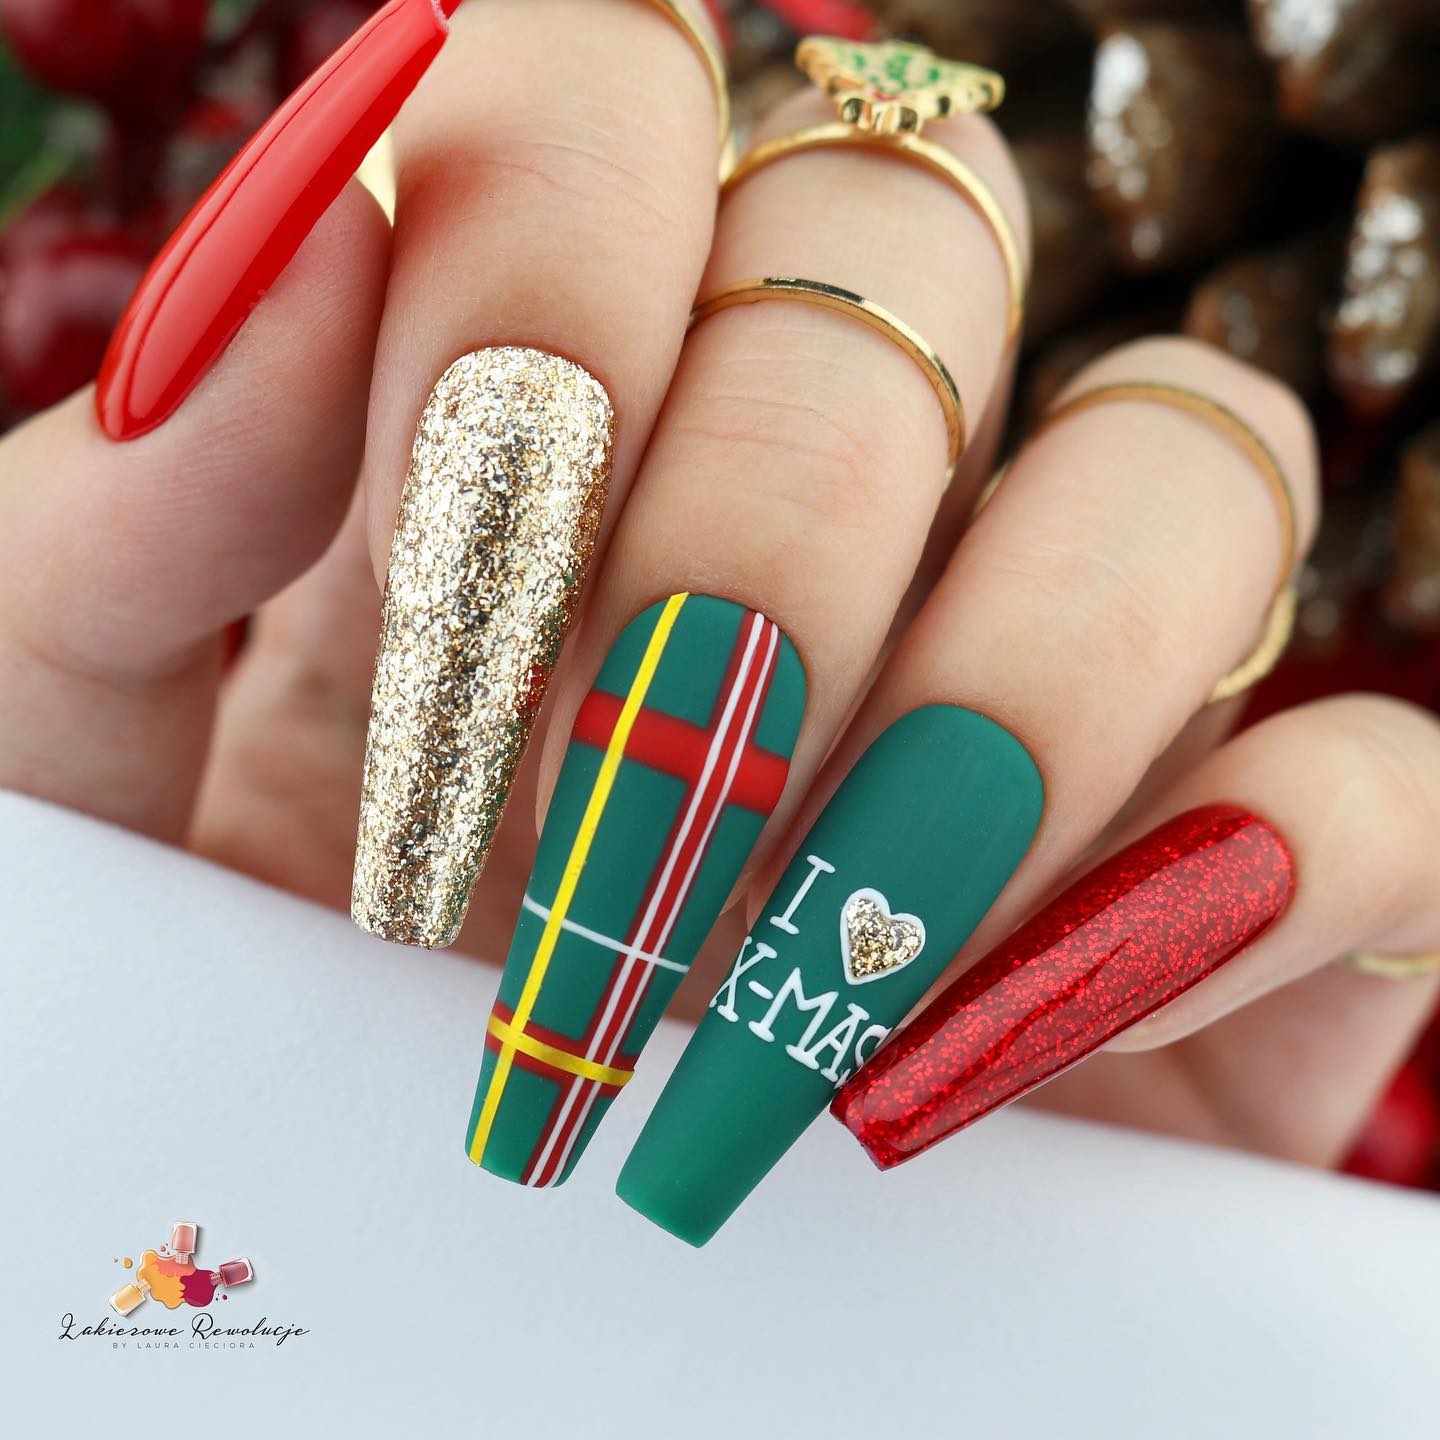 Christmas nails are a great way to get into the Christmas spirit. They're festive, they're sparkly, and they make you feel like the holidays are here!  Matte dark green and glittered red and golden nail polishes will help you get into that spirit.